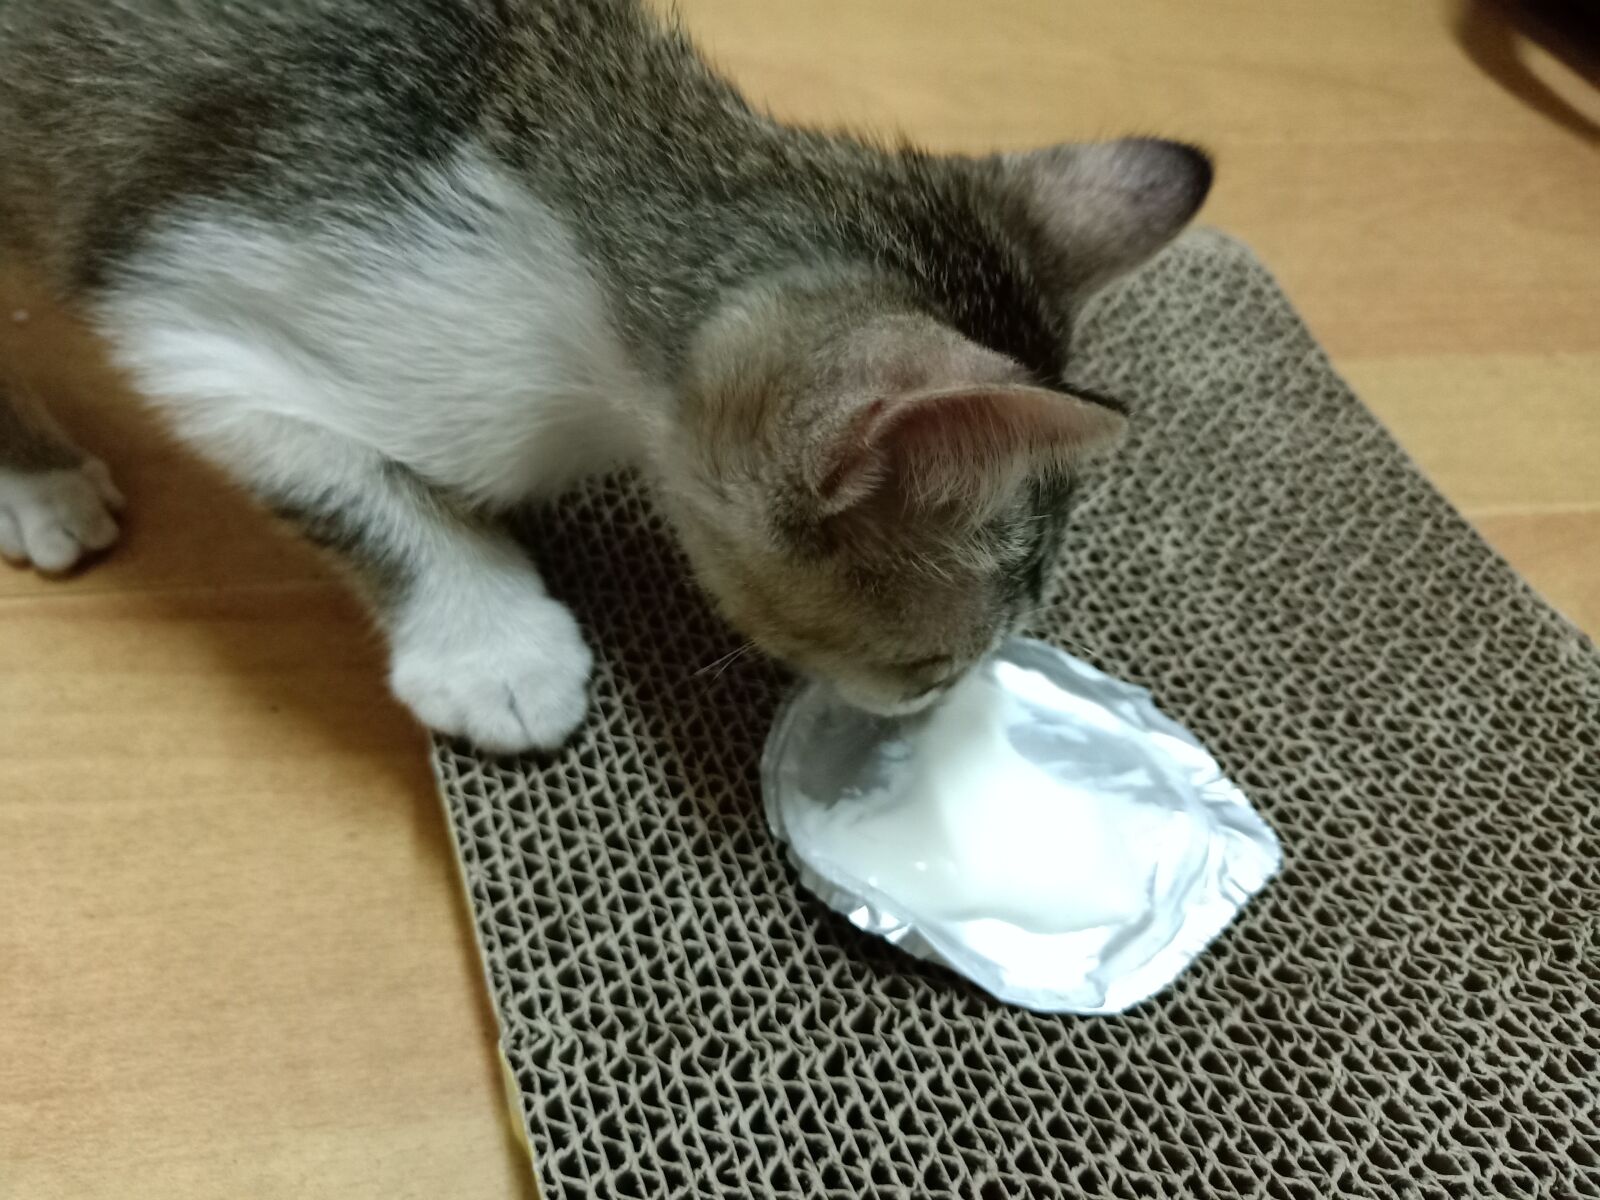 OPPO R15 sample photo. Milk the cat, drink photography